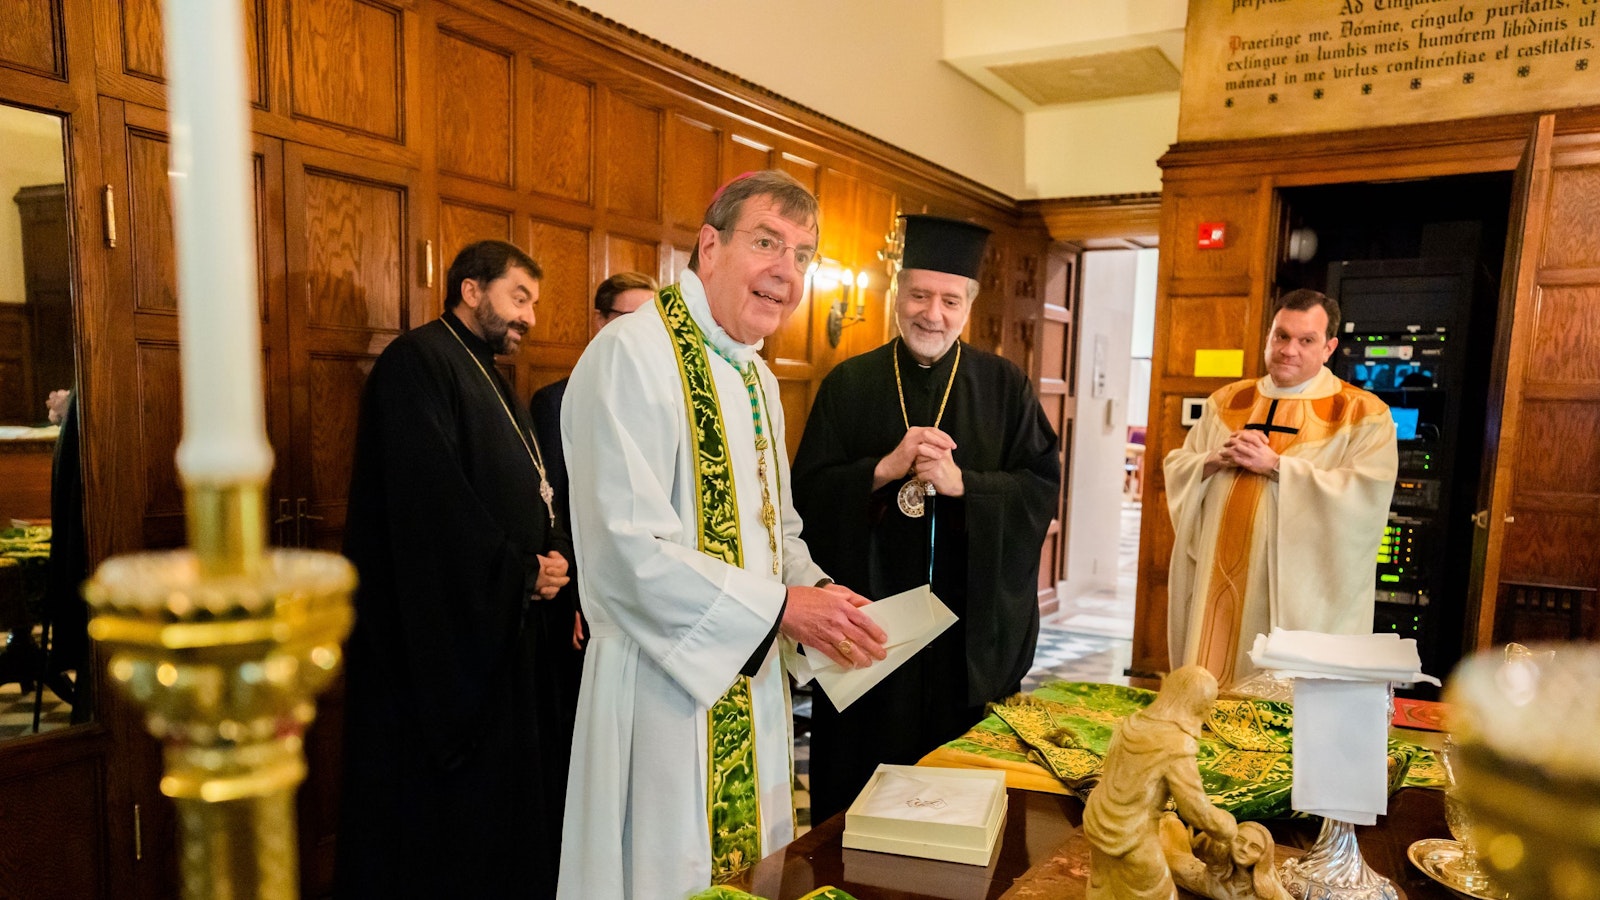 Archbishop Vigneron smiles during a reception with Greek Orthodox Metropolitan Nicholas in the sacristy of the Cathedral of the Most Blessed Sacrament during a celebration for his 25th episcopal jubilee on July 11, 2021. (Valaurian Waller | Detroit Catholic)